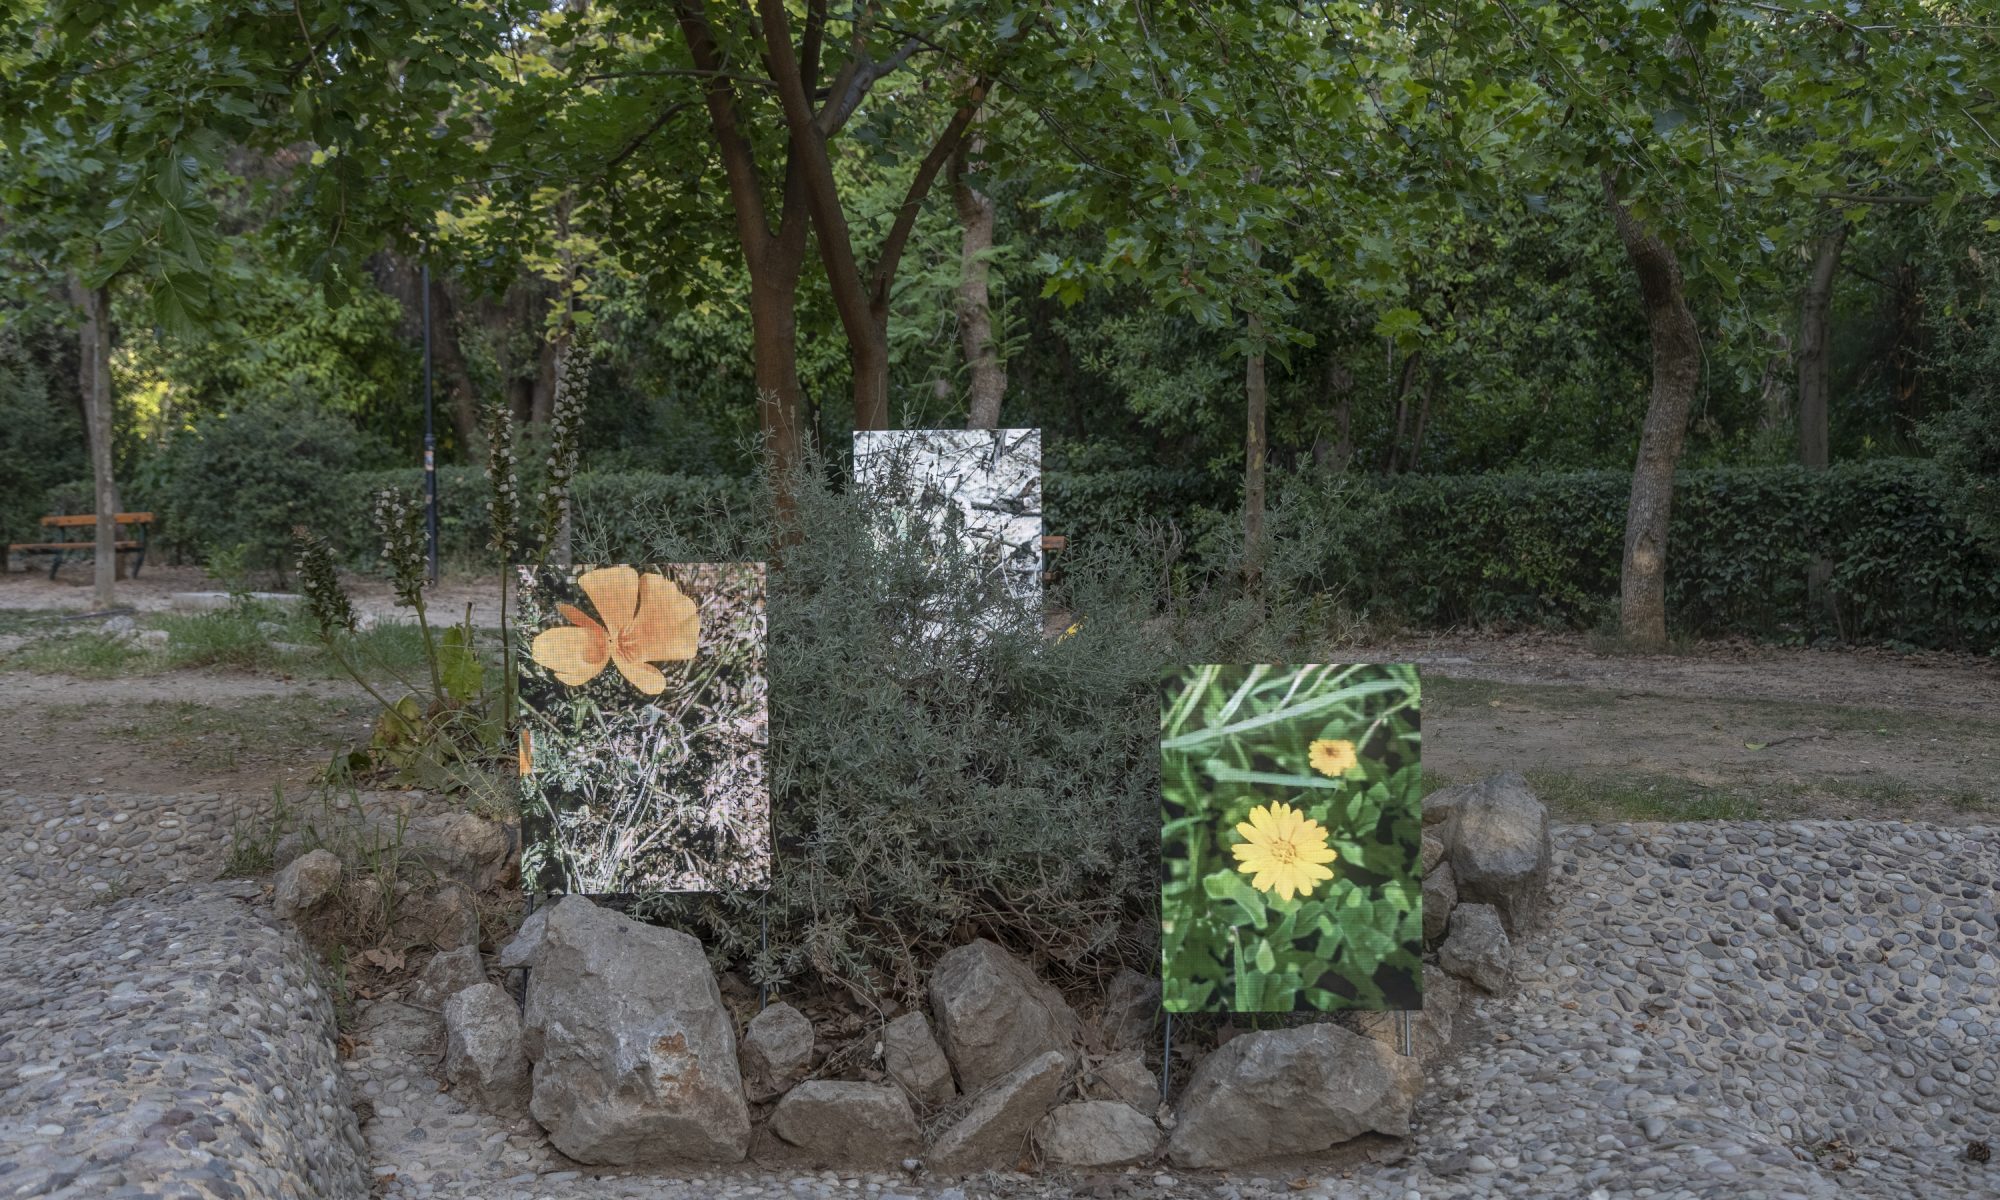 An image showing Anna Ridler’s Circadian Bloom installed outdoors in Athens. Three screens, showing images of flowers installed in a triangle formation among trees and stones. The left hand image contains an orange flower, the centre image is largely obscured by greenery, and the right hand image shows two yellow flowers.